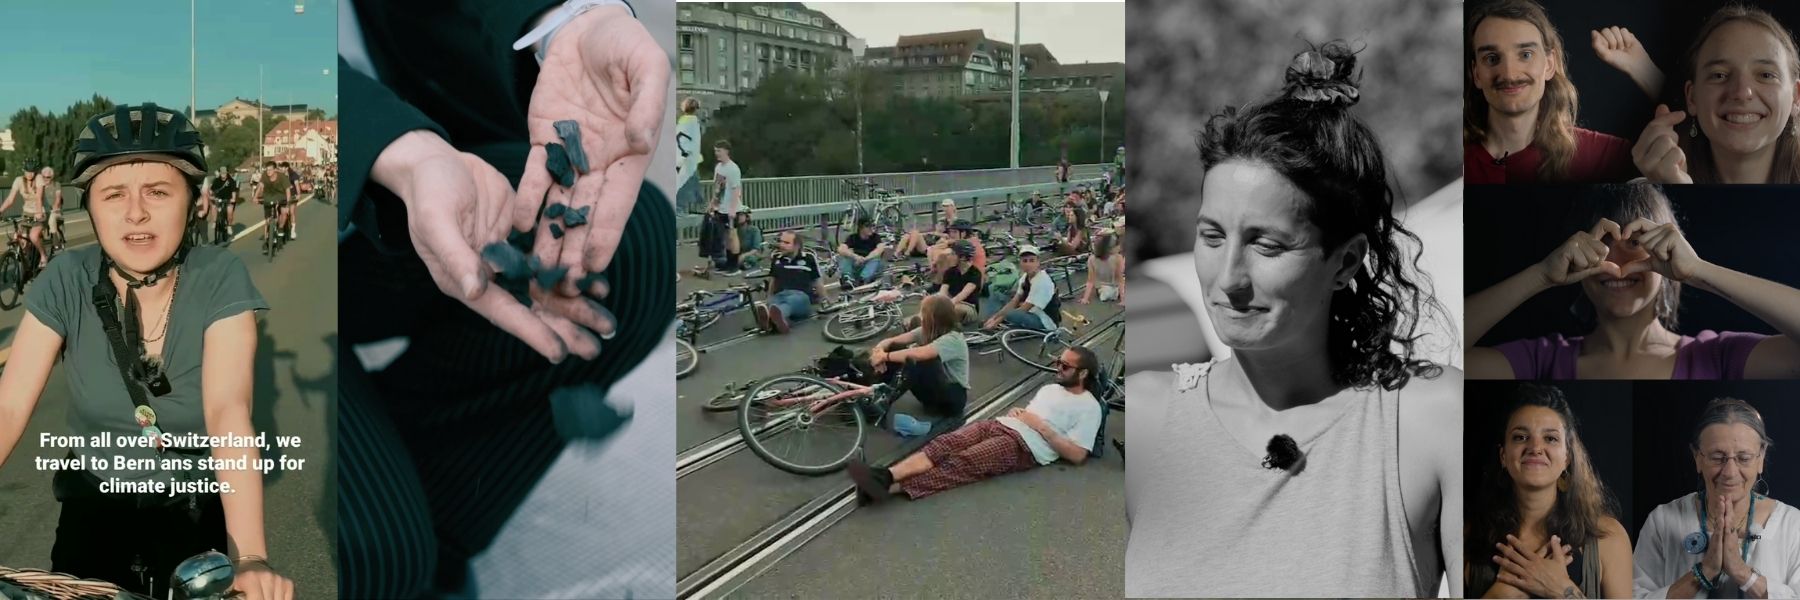 On the image you see different images from video. On person on a bike, them two hands which hold coal, in the middle bcycle activists laying on bridge on the ground next to their bikes, then you see a female looking person with a small microphone fixed to the tshirt and on the left you see 5 persons doing different symbols like heart, fist or just holding hand in the air. 